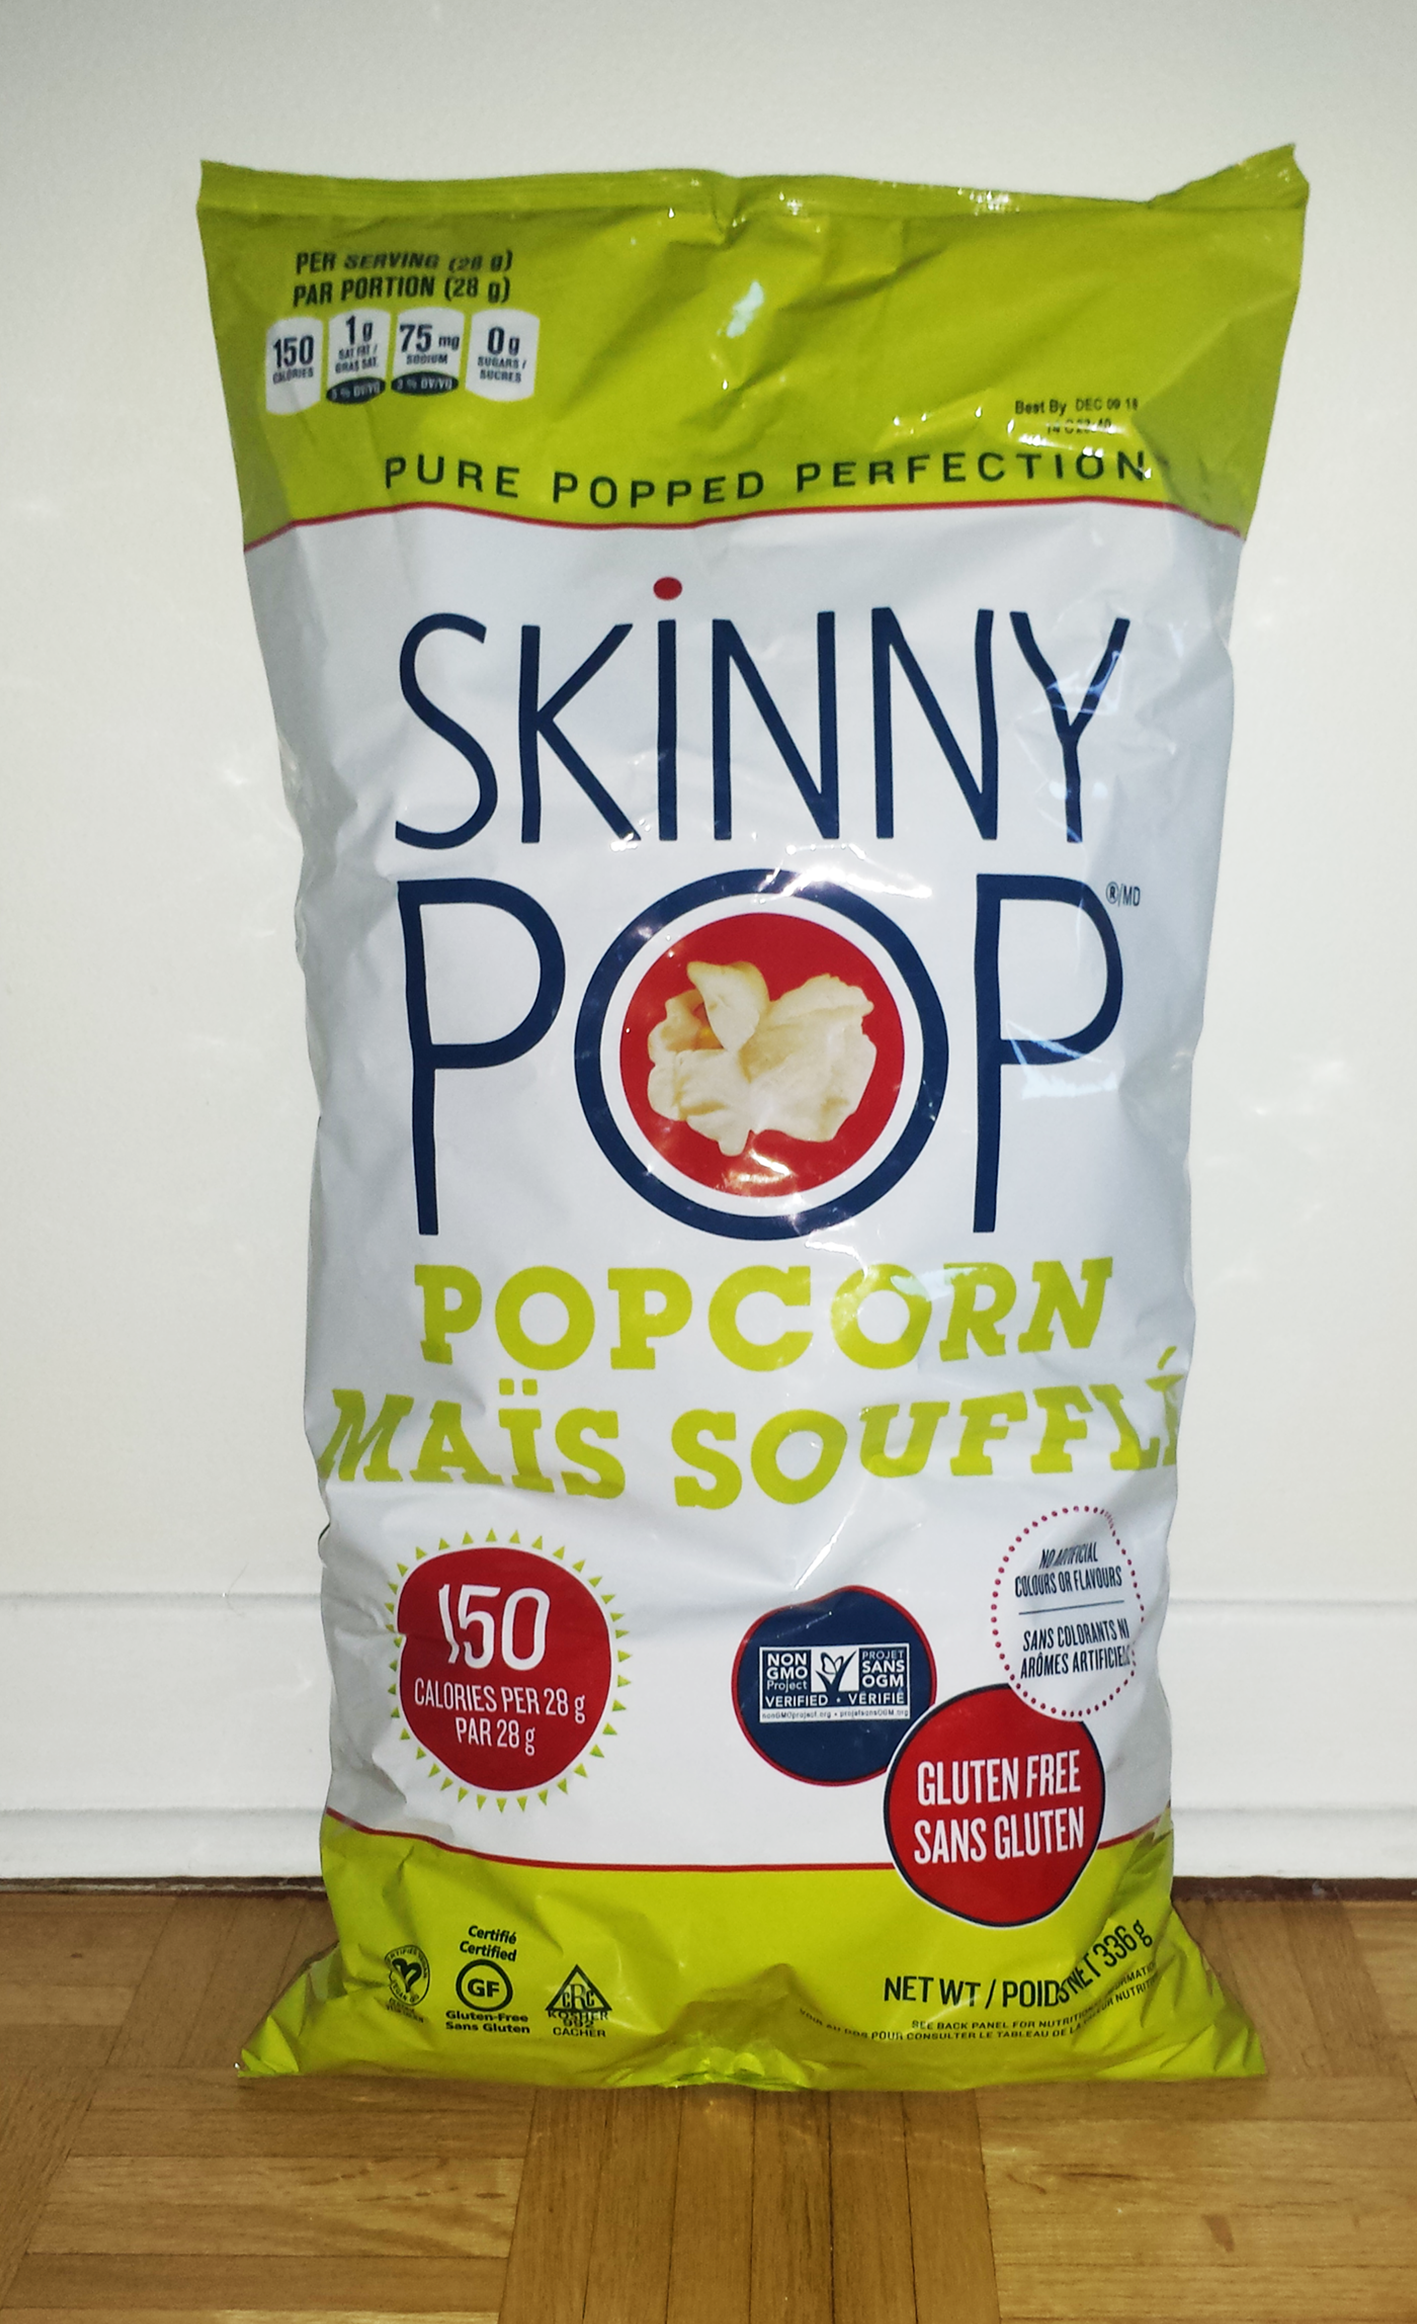 AterImber.com - The Veg Life - Product Reviews - Skinny Pop! White Cheddar Review - Giant Skinny Pop! Bag - vegan, vegan food, popcorn, food review, food reviewer, food blooger, product review